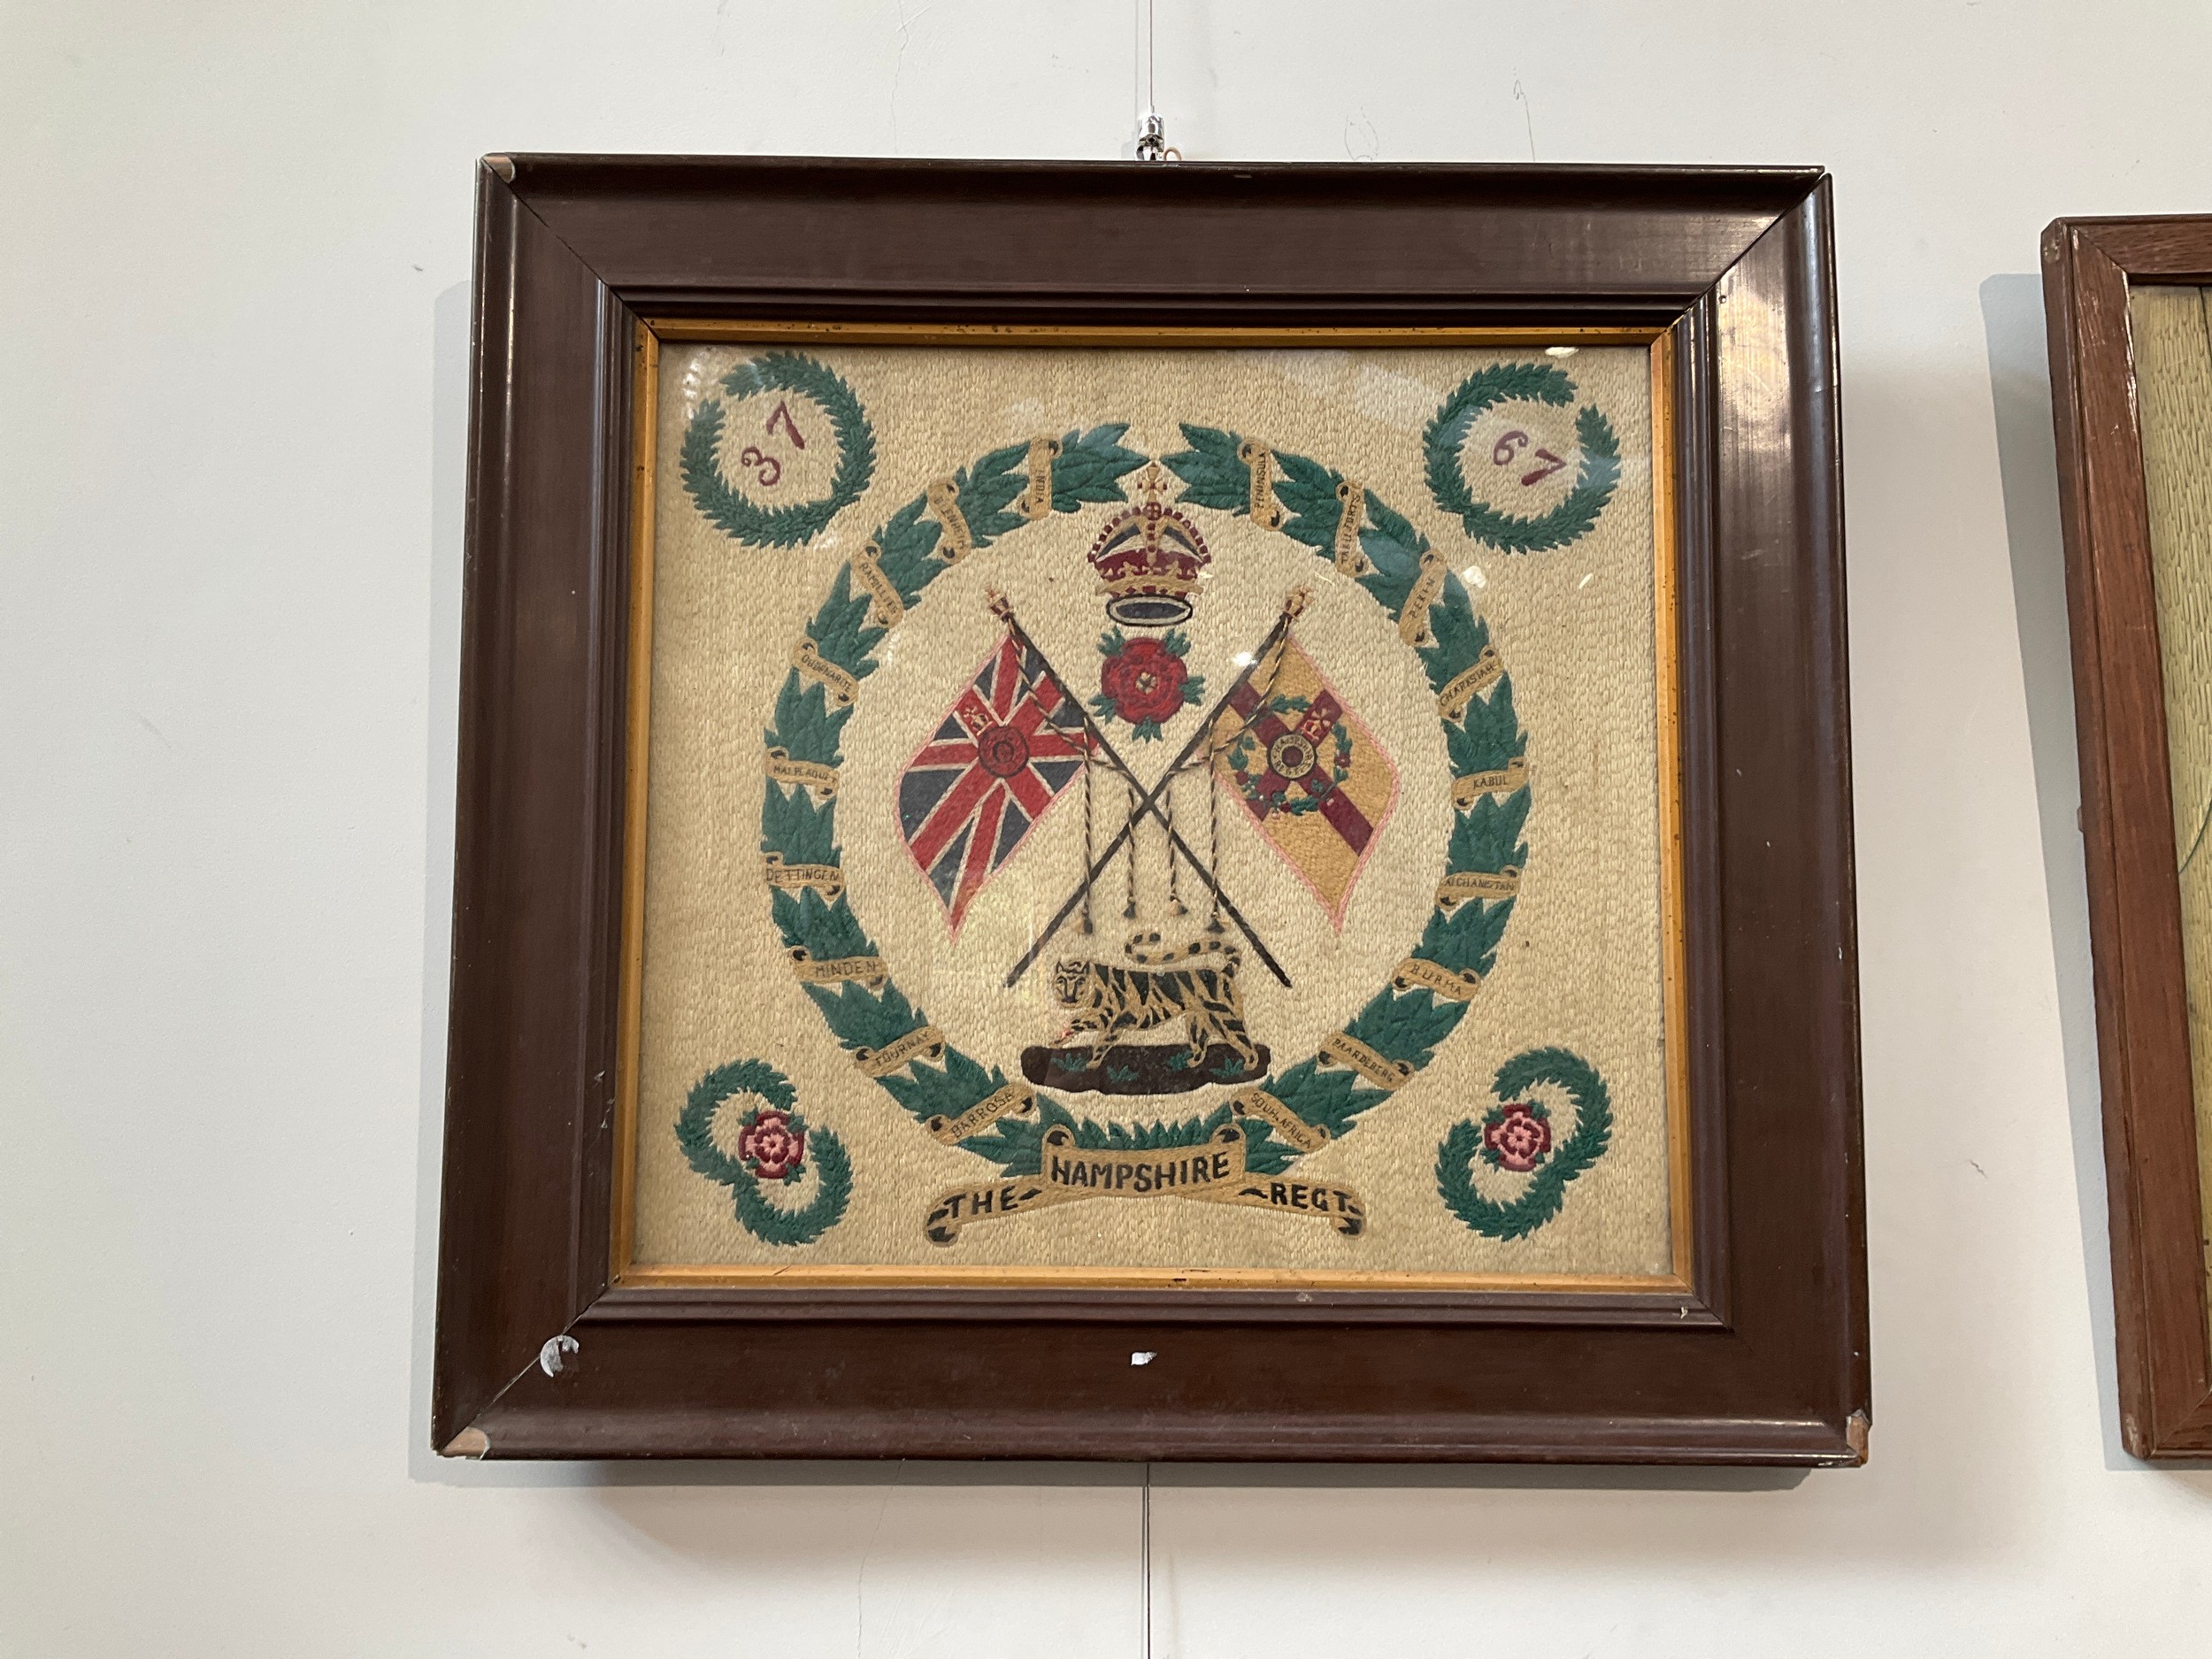 A WWI Hampshire Regiment tapestry together with a Boer War 10th Hussars tapestry, both framed and